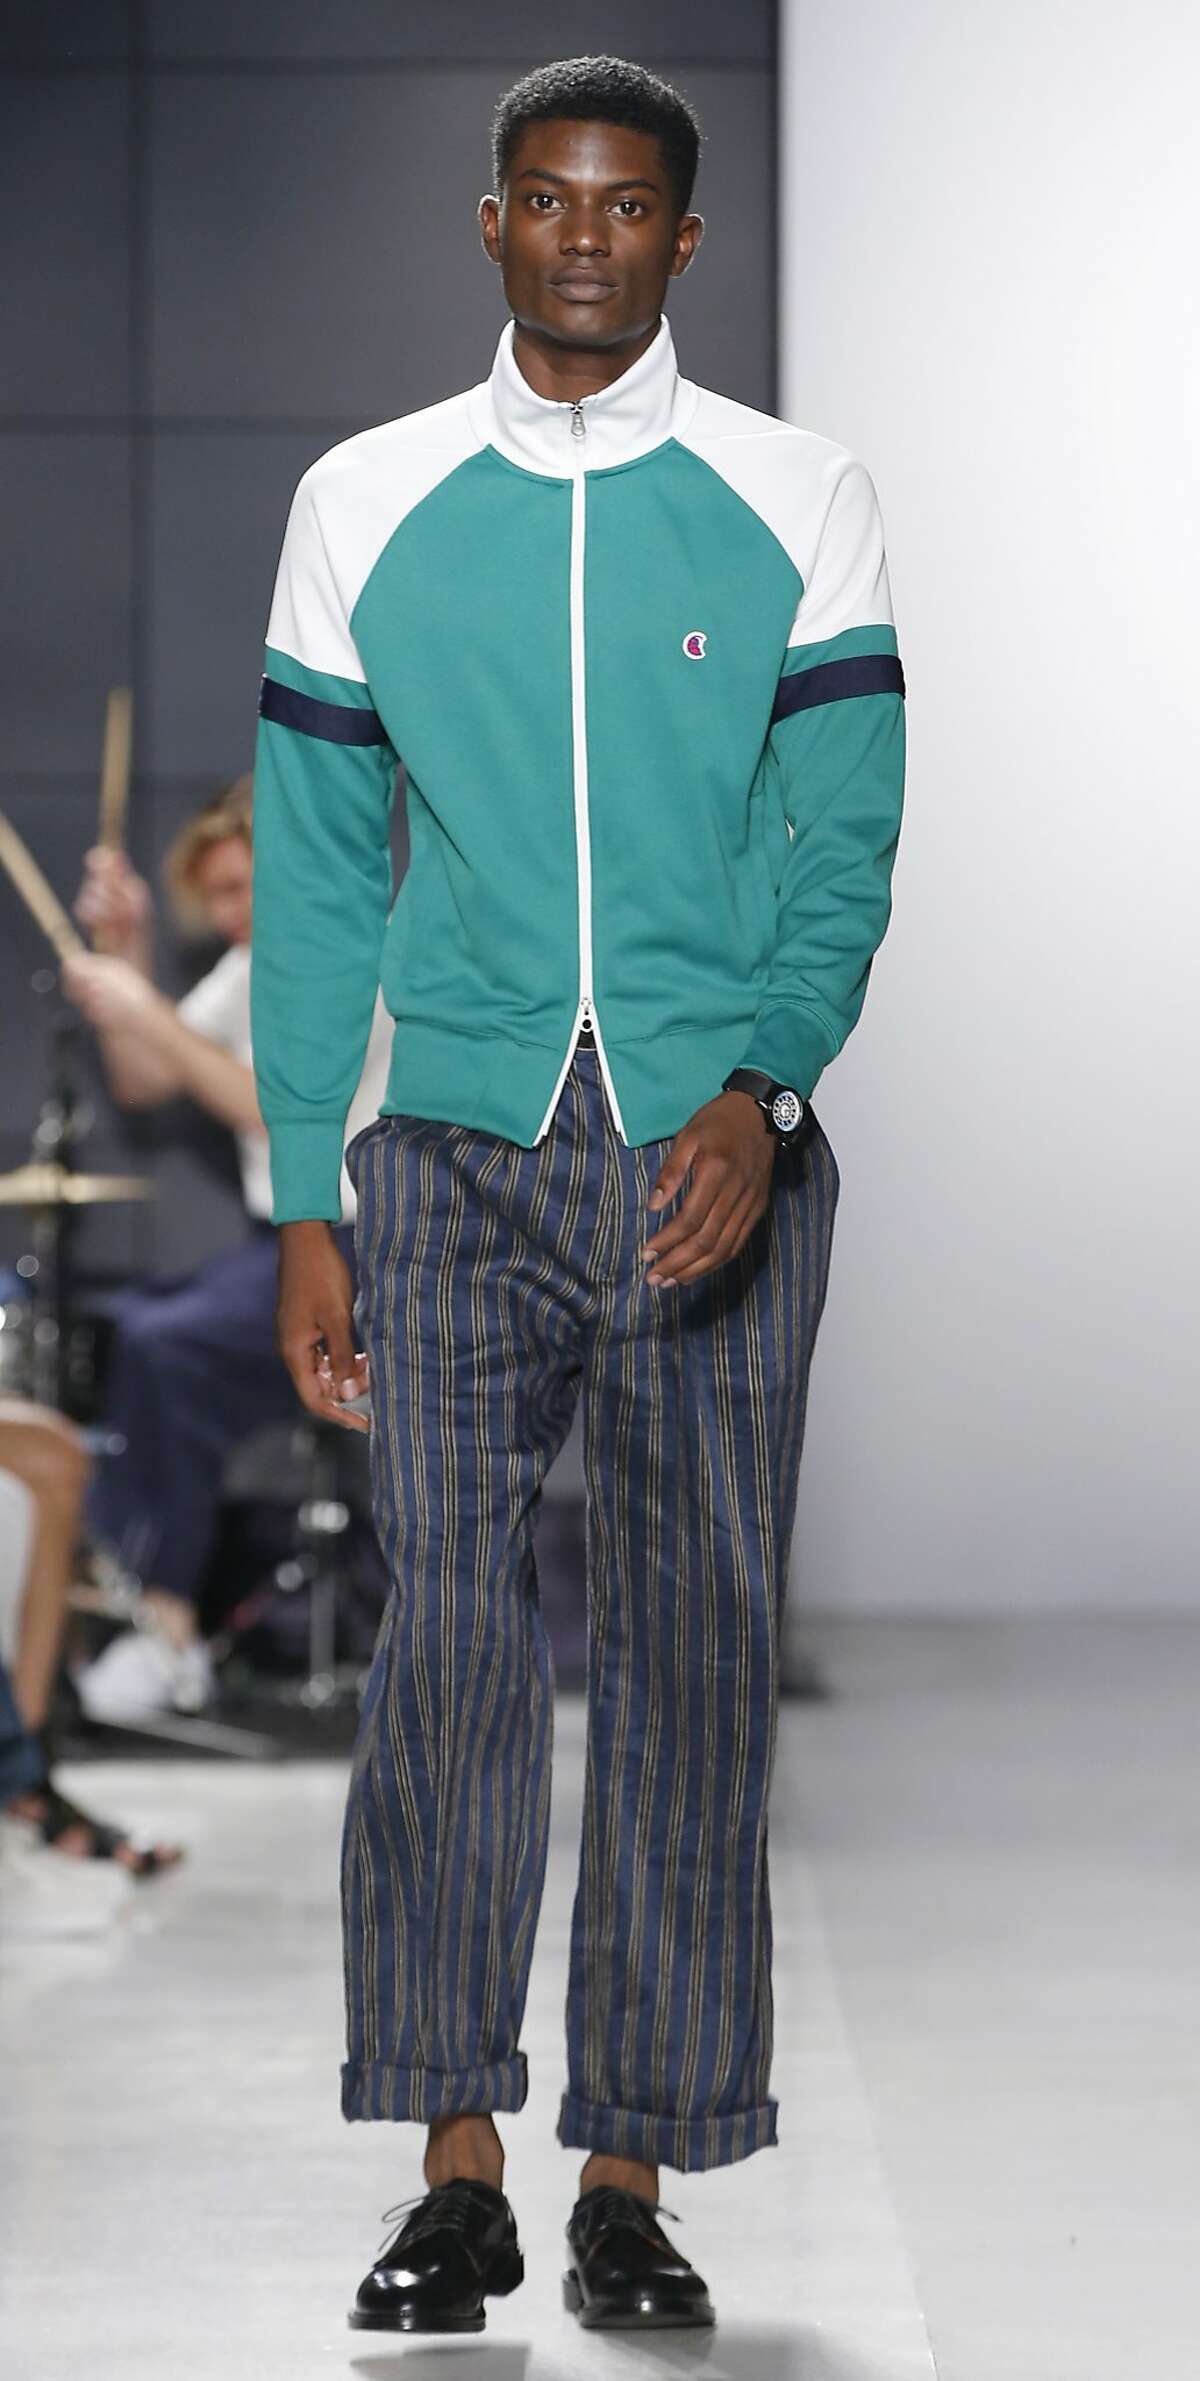 Four trends to emerge from New York Fashion Week Men’s